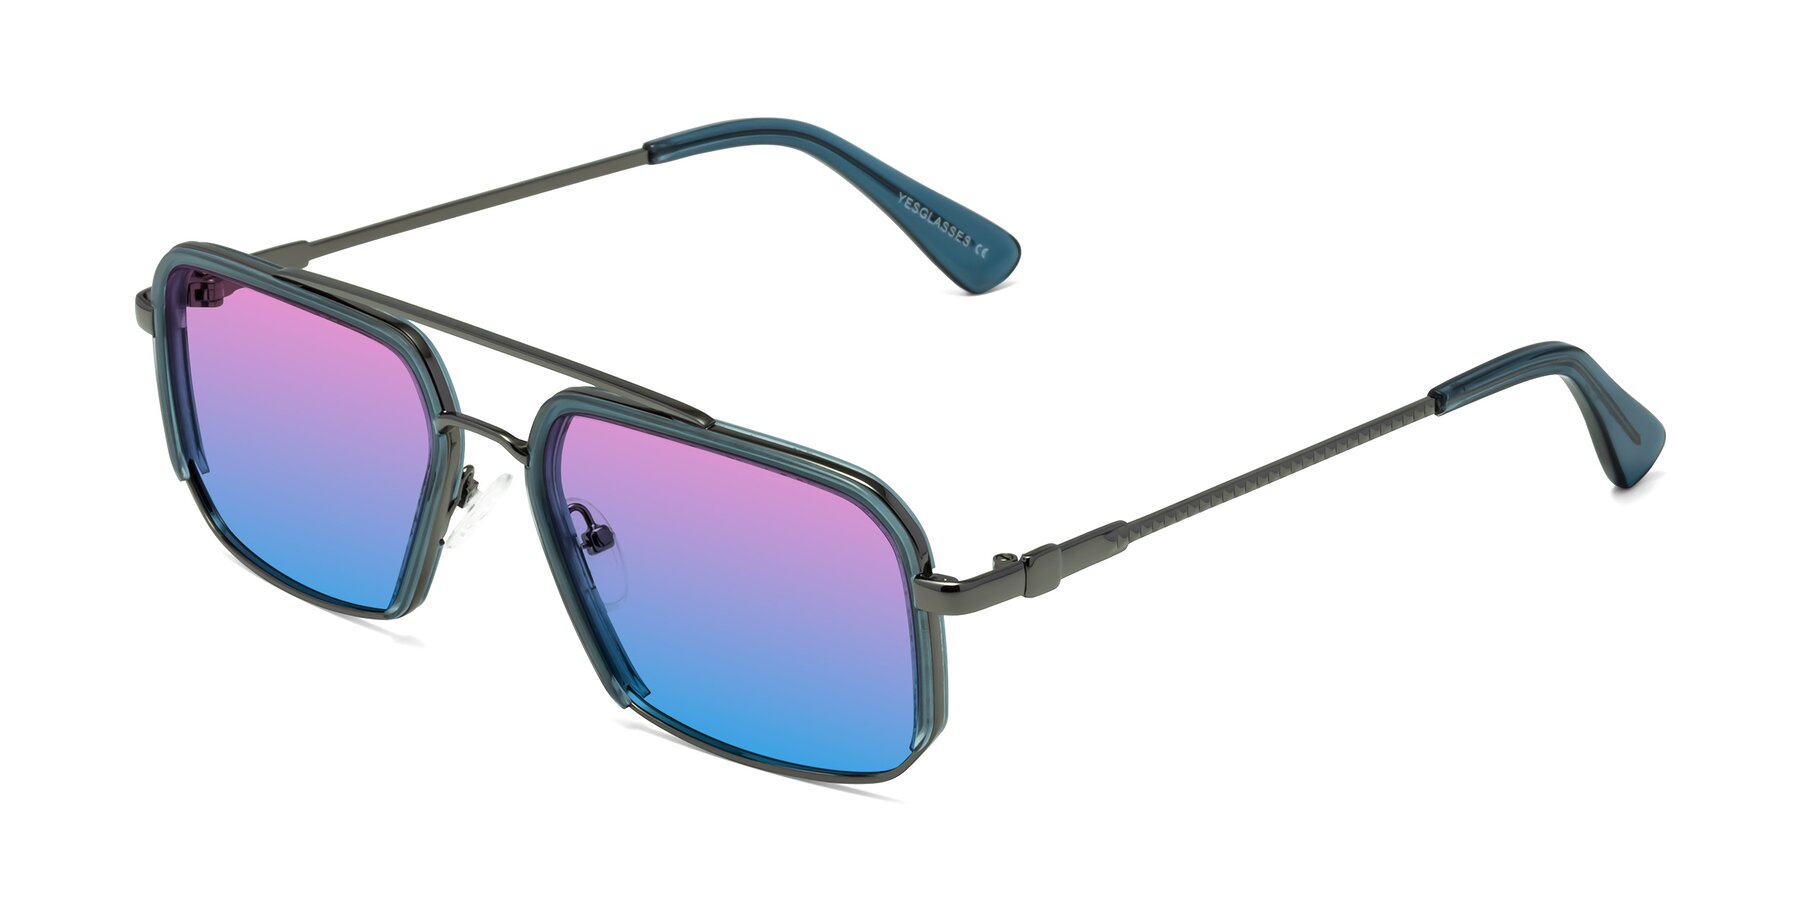 Angle of Dechter in Teal-Gunmetal with Pink / Blue Gradient Lenses